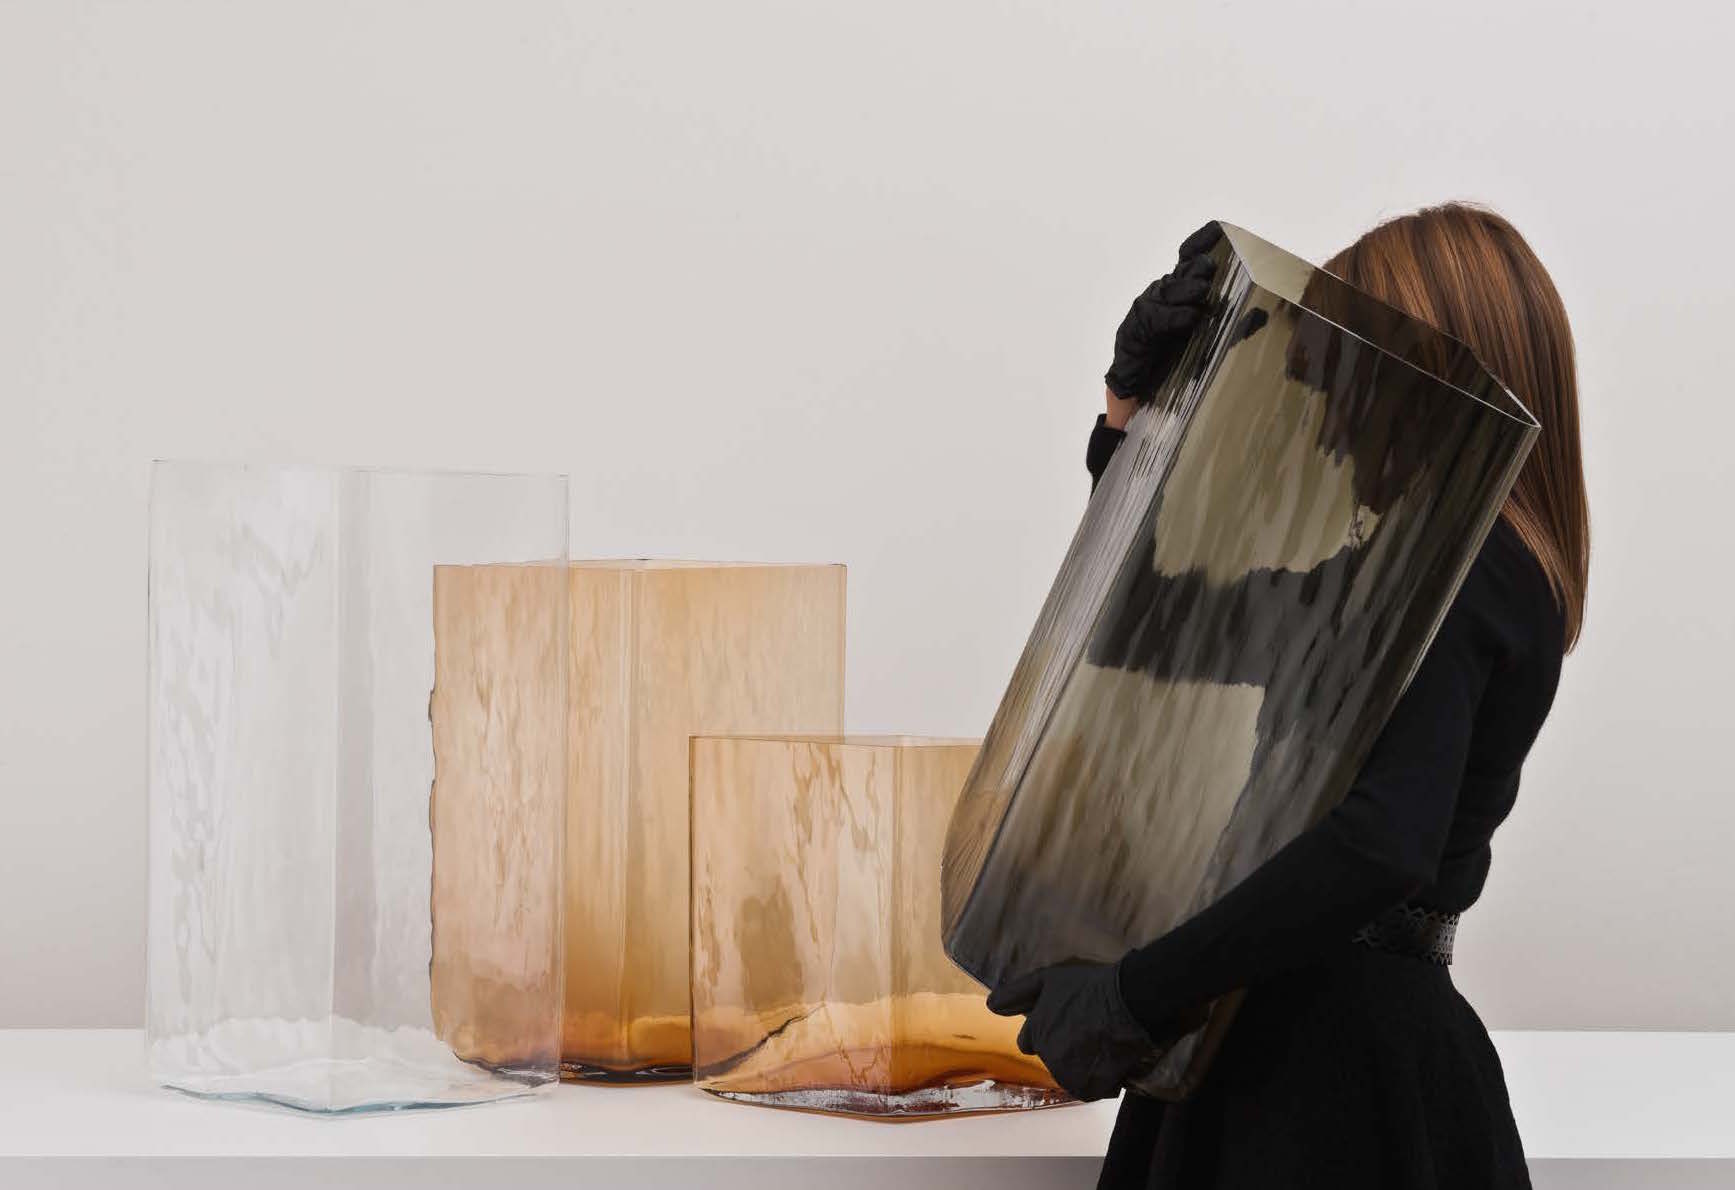 Ronan and Erwan Bouroullec - Ruutu one-off Collection 